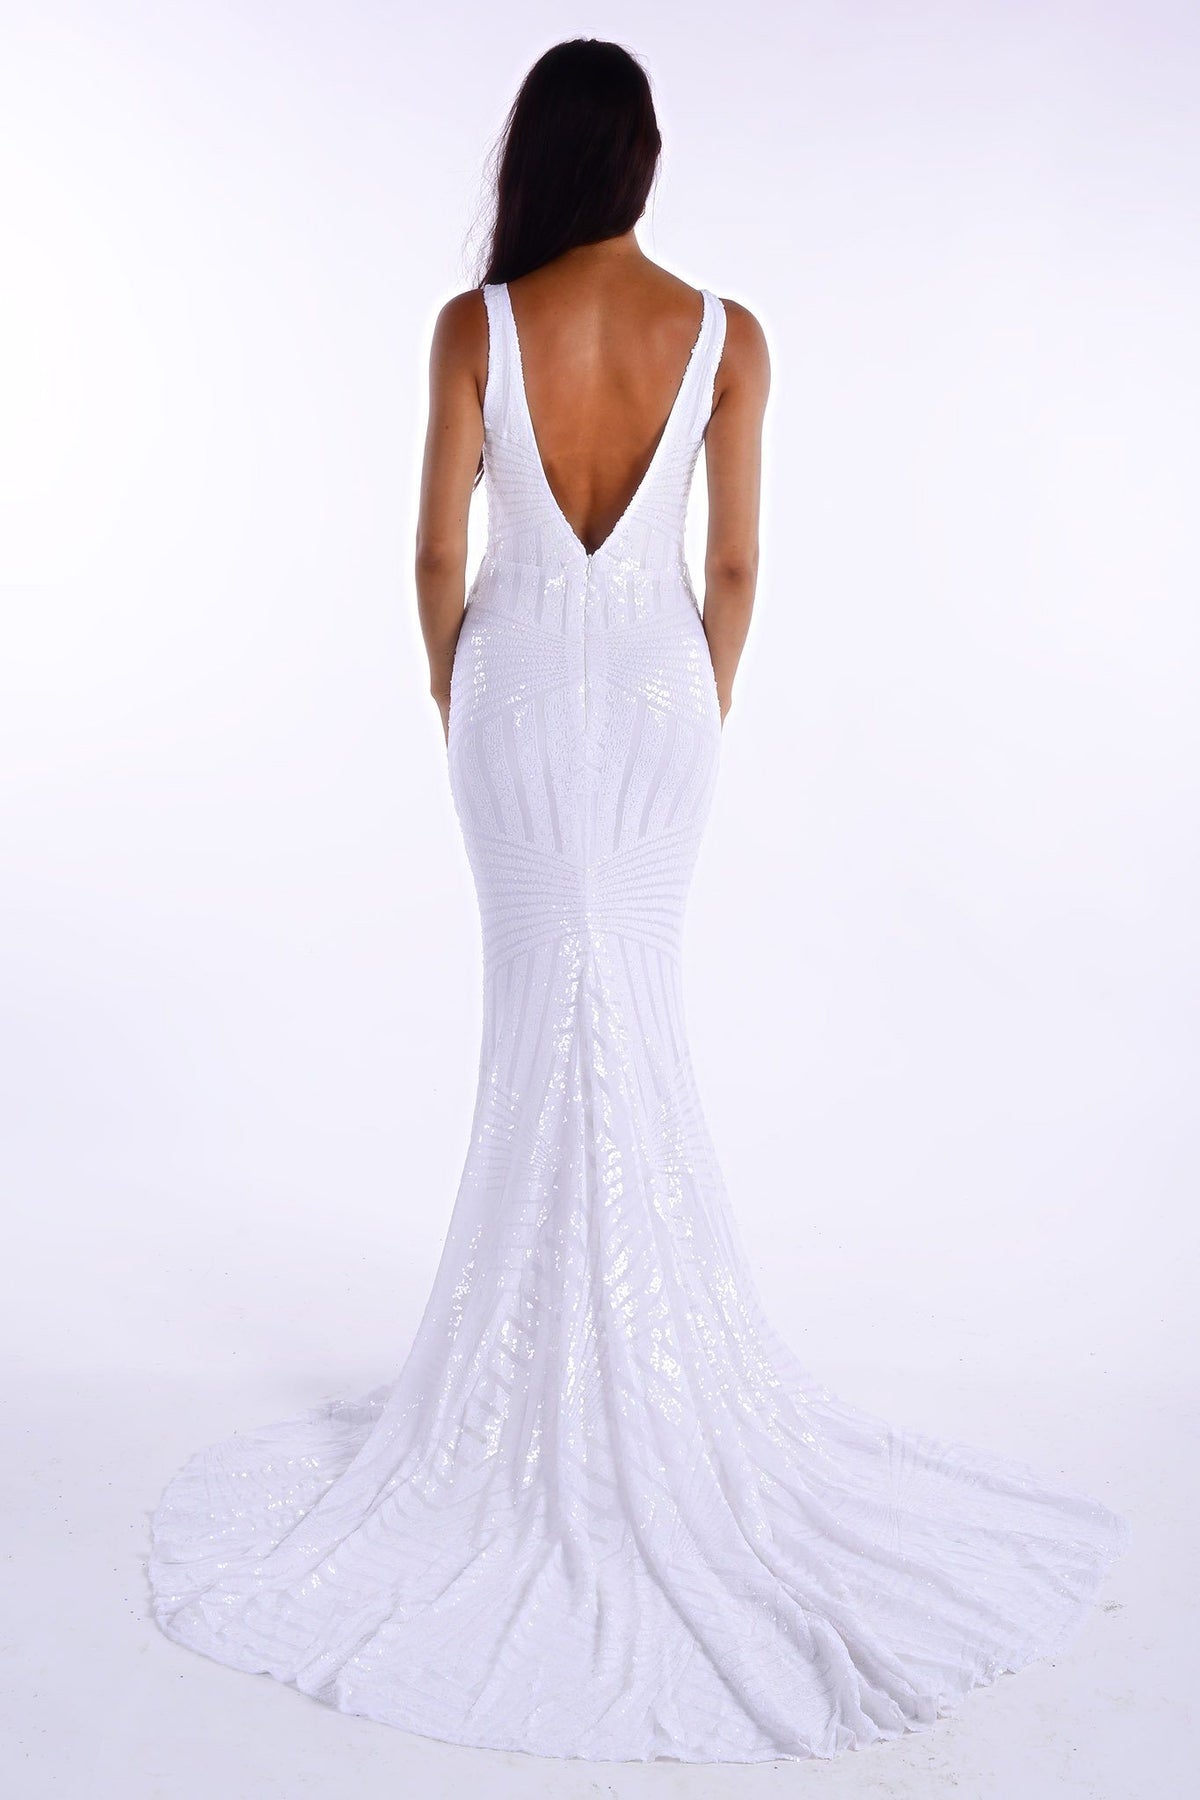 Backless Design of White geometric sequin sleeveless evening gown featuring sweetheart neckline, shoulder straps, V open back and a very long train